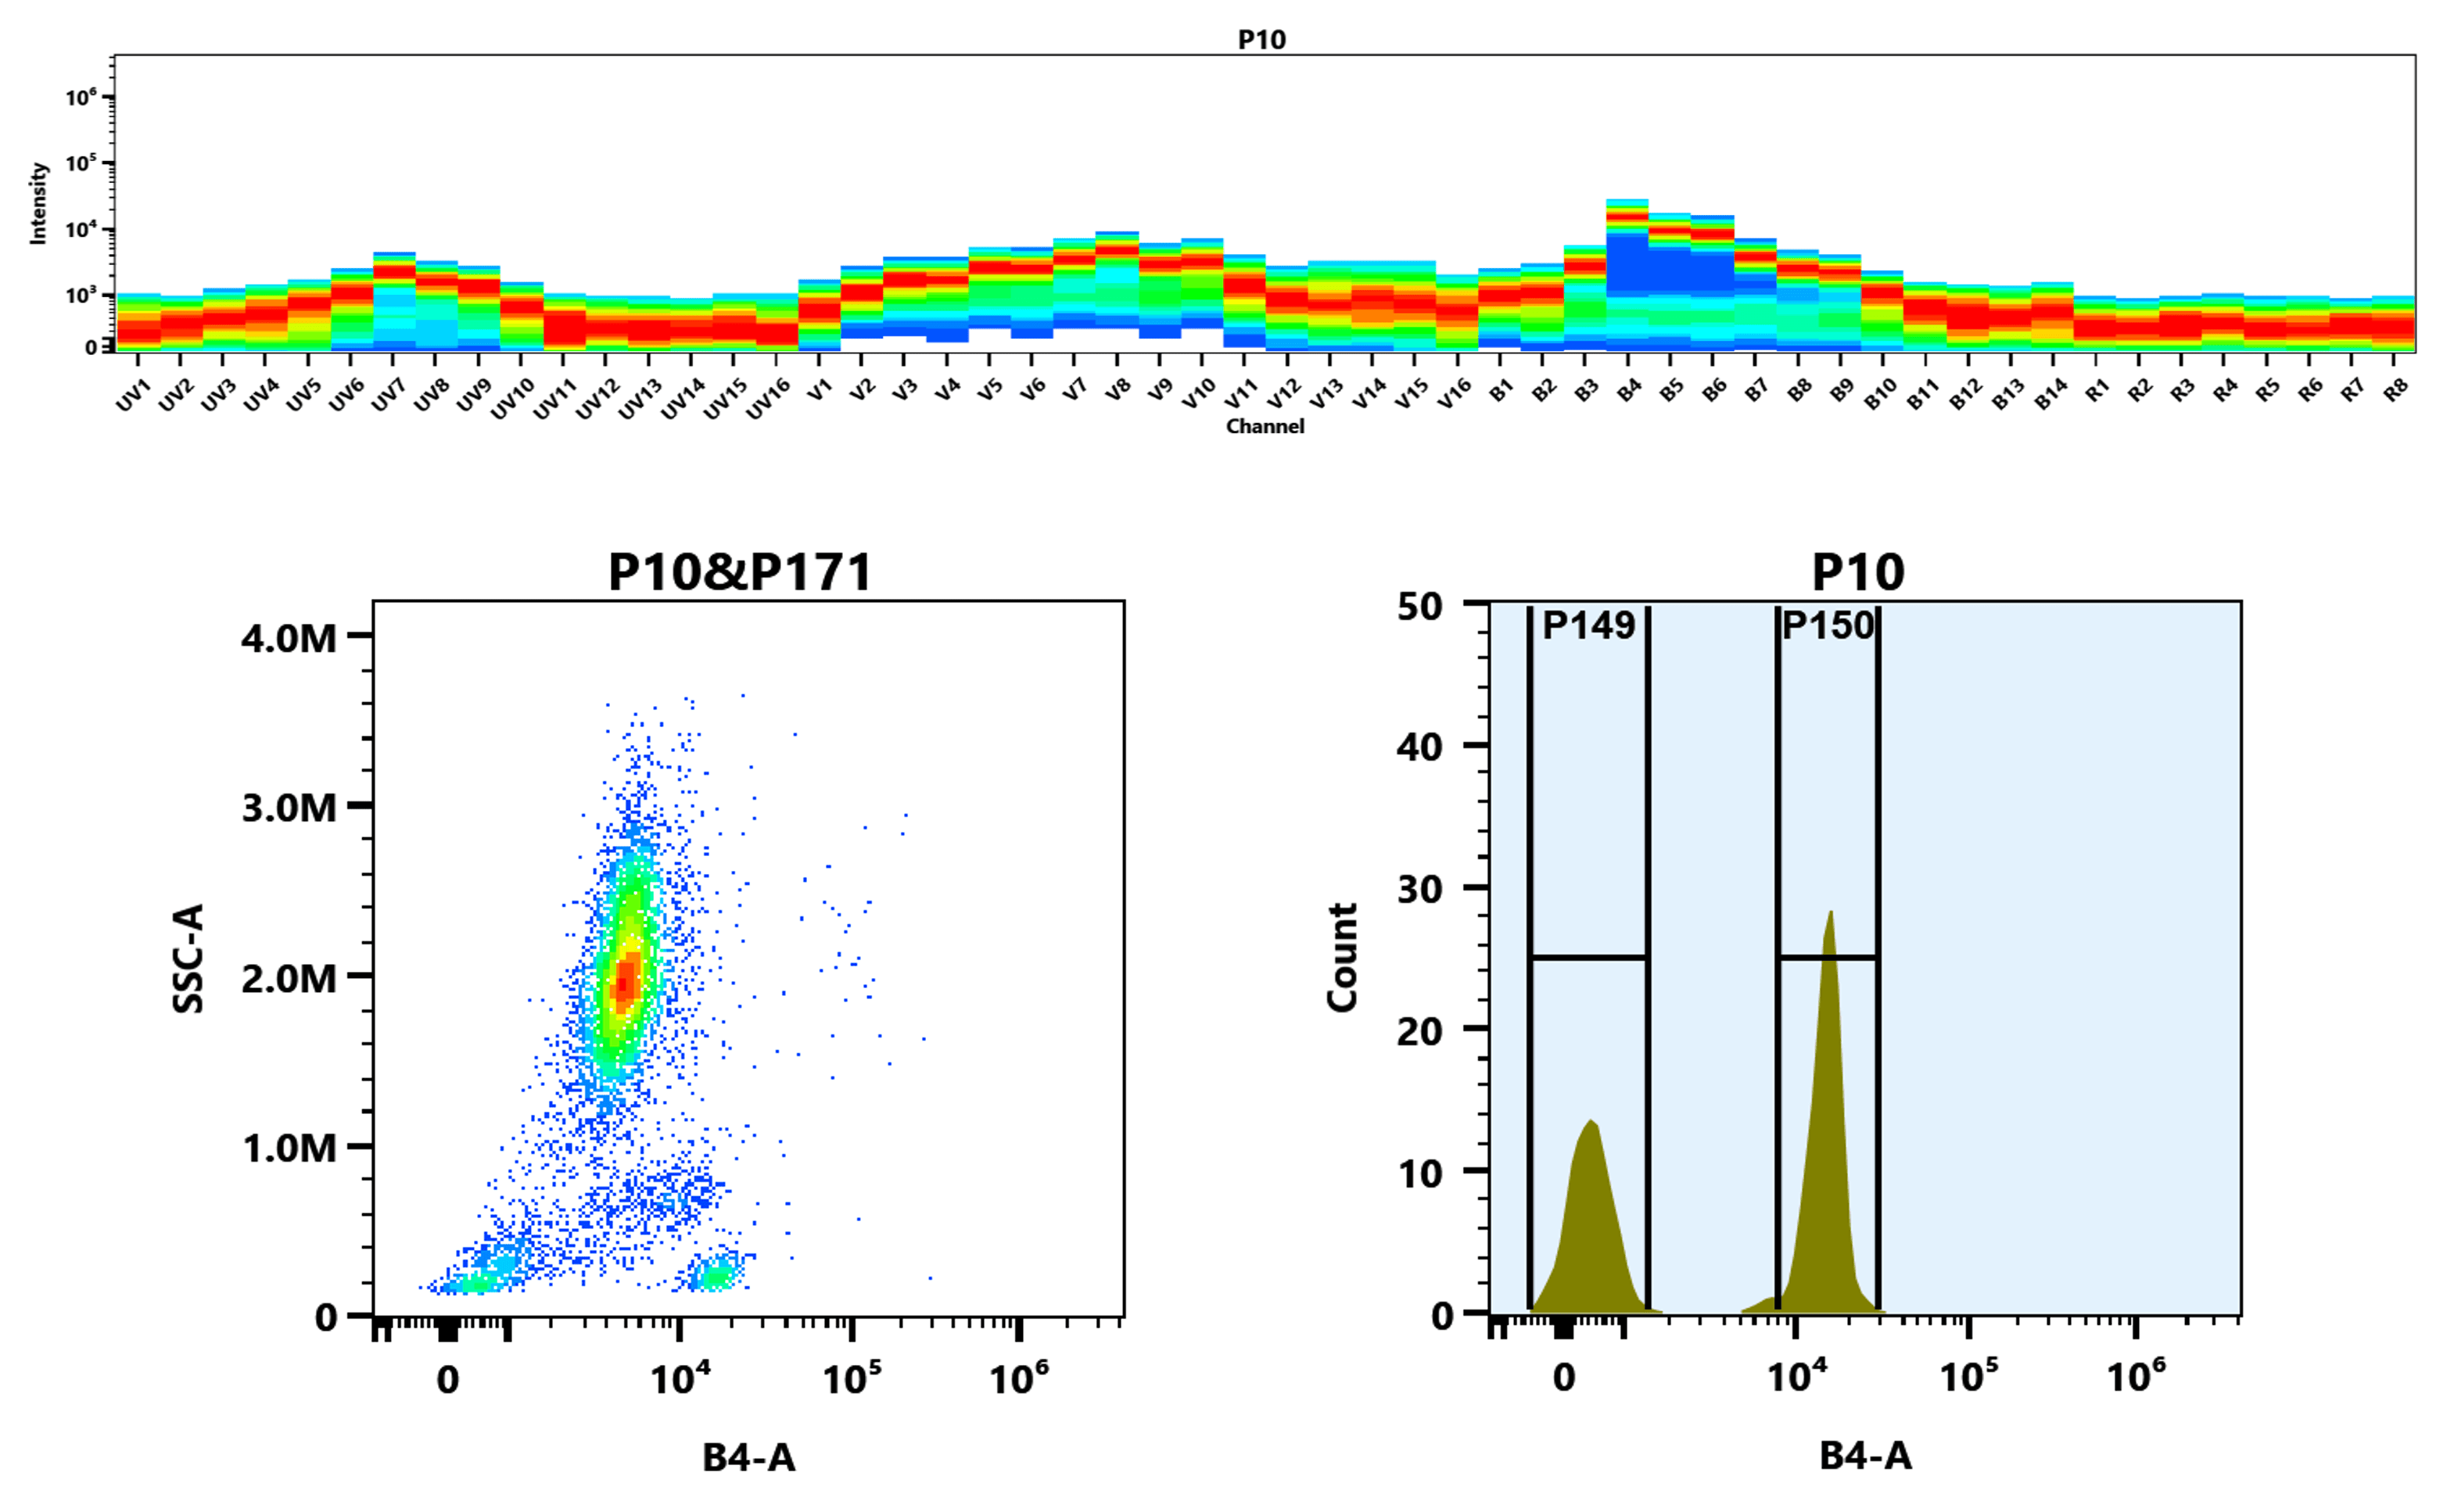 Top) The Spectral pattern was generated using a 4-laser spectral cytometer. Four spatially offset lasers (355 nm, 405 nm, 488 nm, and 640 nm) were used to create four distinct emission profiles, which, when combined, yielded the overall spectral signature. Bottom) Flow cytometry analysis of whole blood stained with mFluor™ Blue 570 anti-human CD4 *SK3* conjugate. The fluorescence signal was monitored using an Aurora spectral flow cytometer in the mFluor™ Blue 570 B4-A channel.